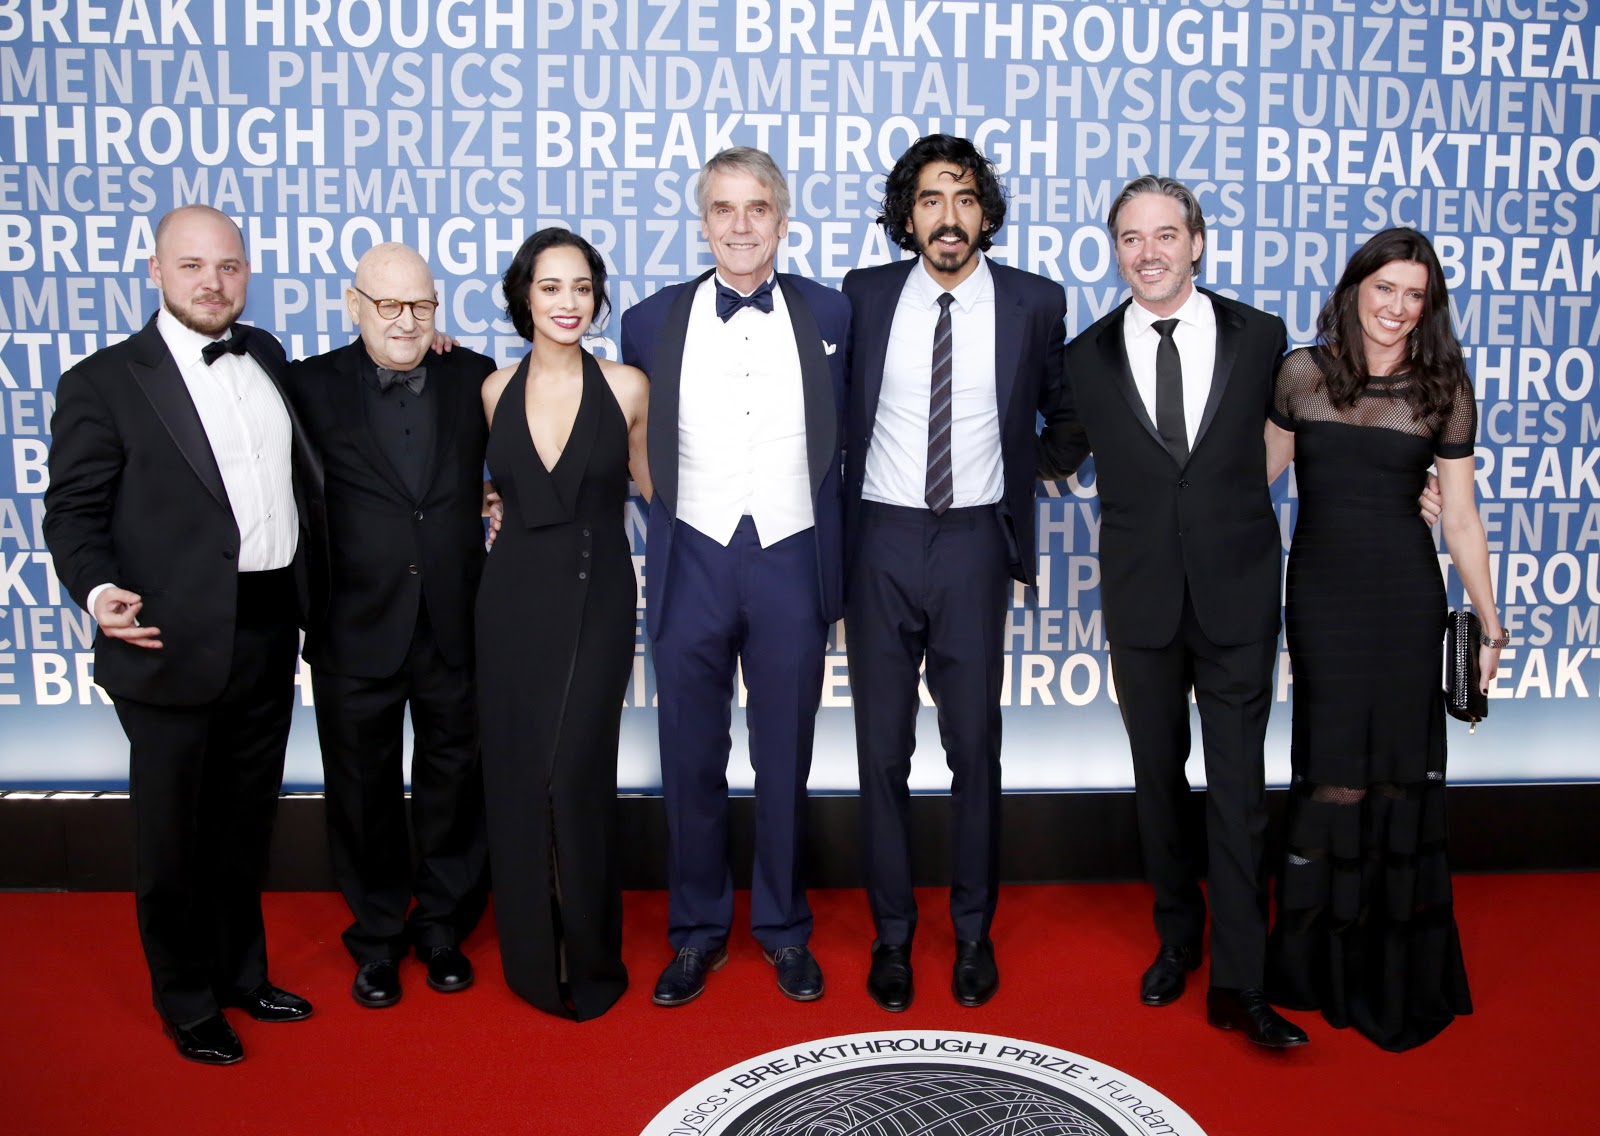  (L-R) Filmmakers Sam Pressman and Ed Pressman, actors Devika Bhise, Jeremy Irons, Dev Patel, Writer-Director Matt Brown, and artist Melissa Herrington attend the 2017 Breakthrough Prize at NASA Ames Research Center on December 4, 2016 in Mountain View, California.  (Photo by Kimberly White/Getty Images for Breakthrough Prize)